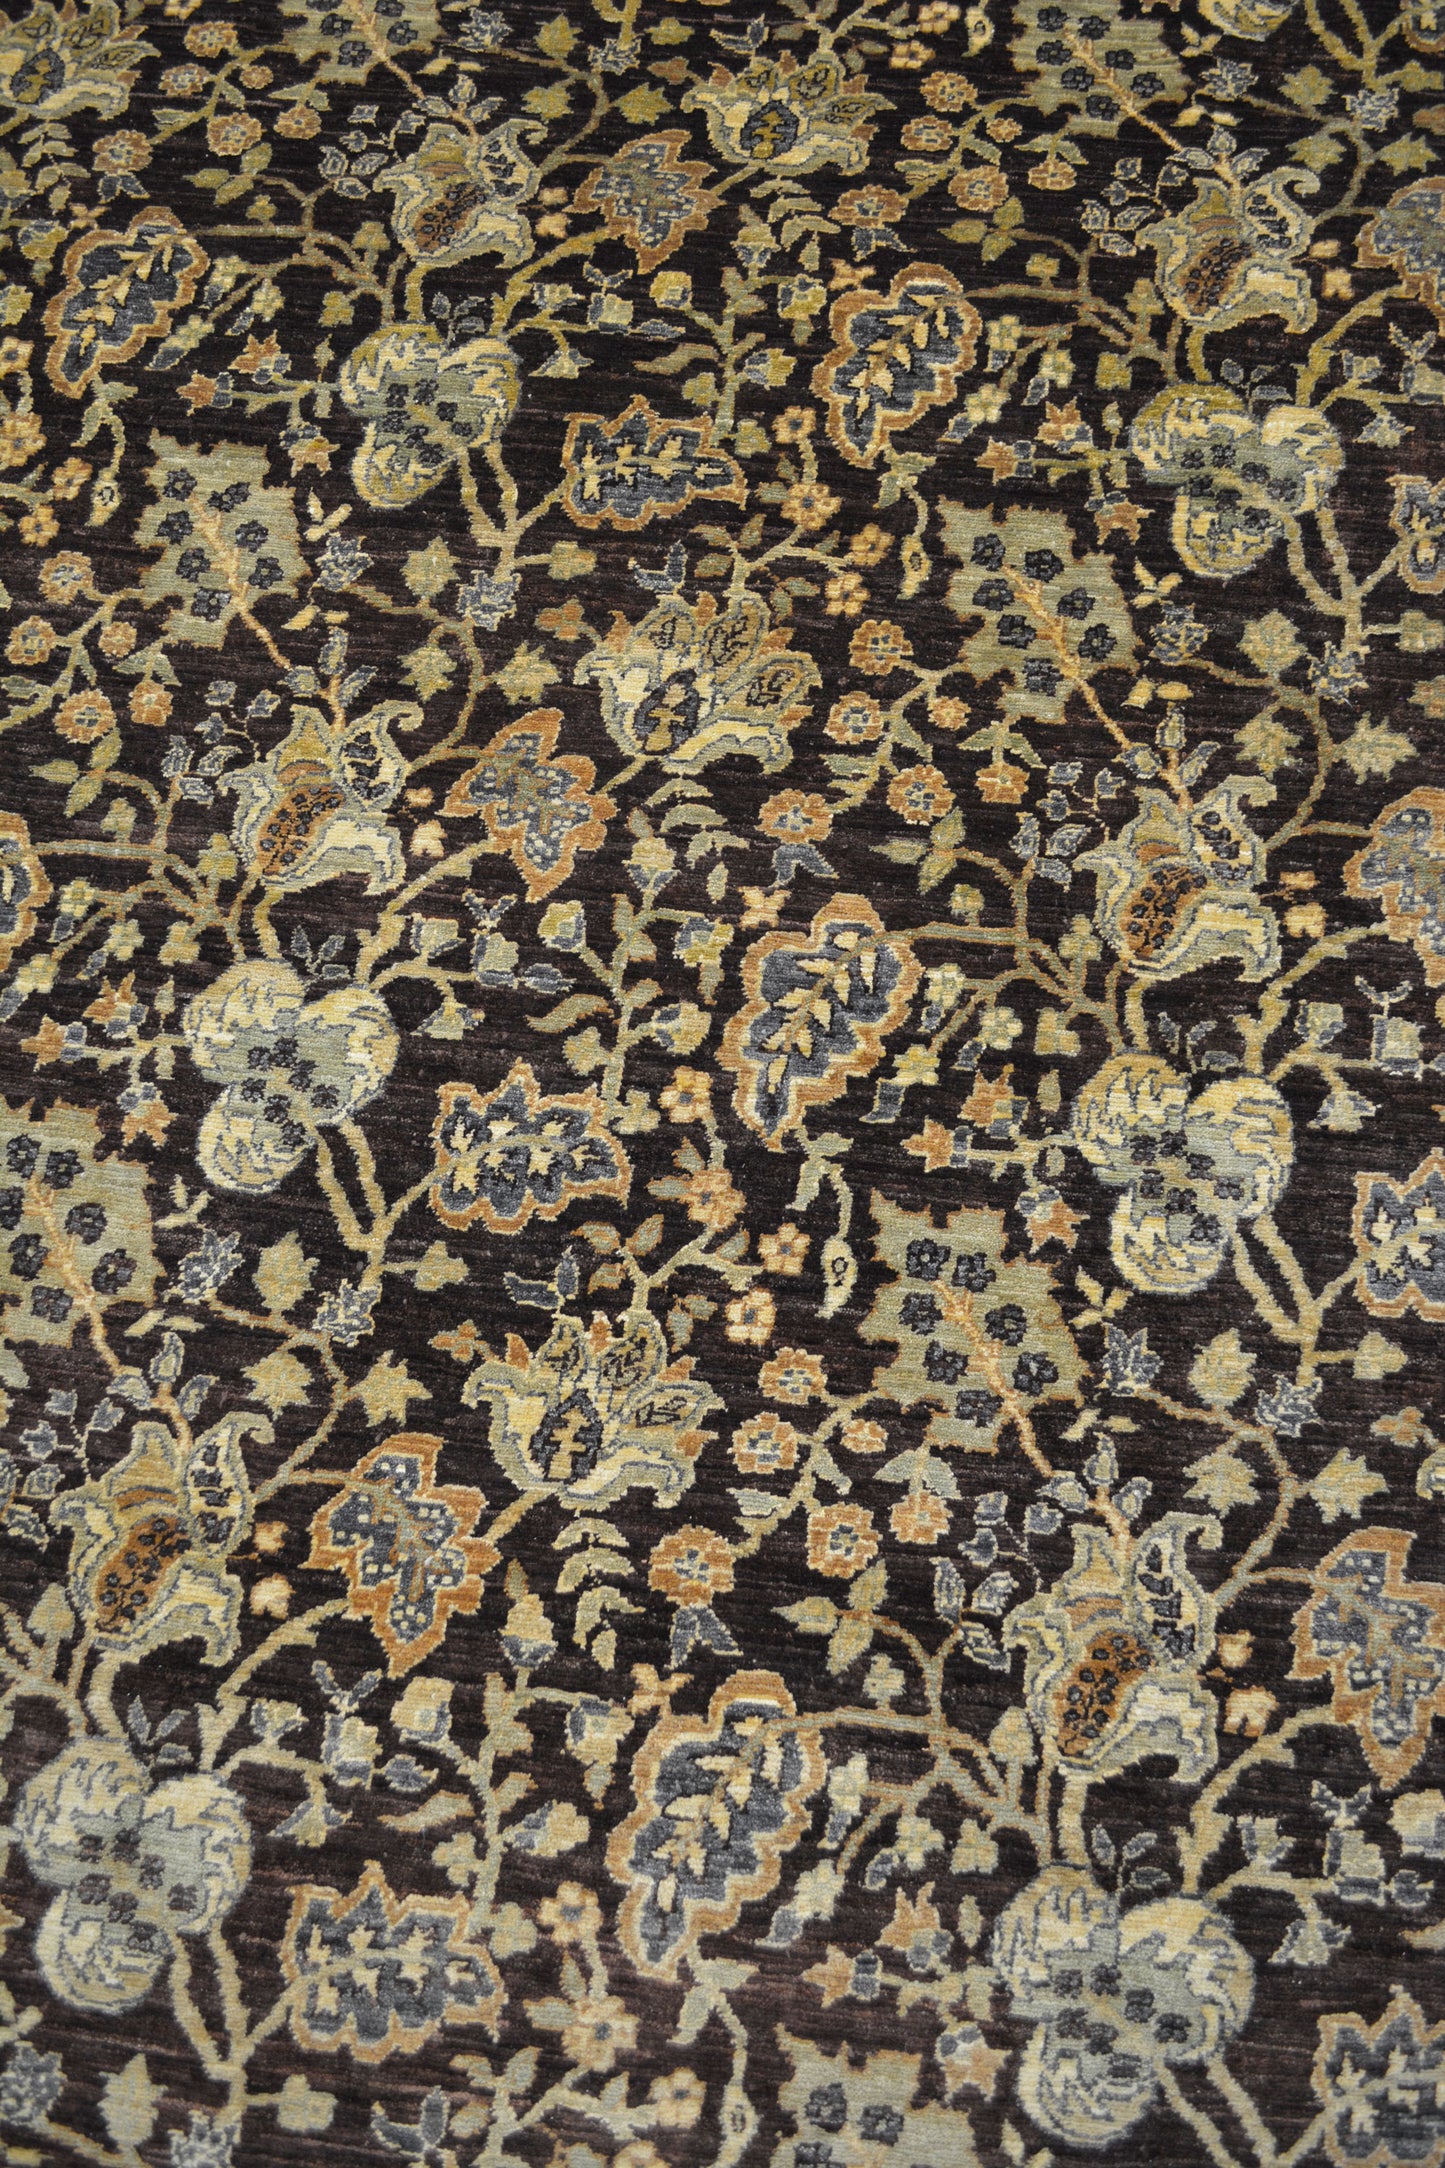 The center of the rug features the beautiful details of the decoration.